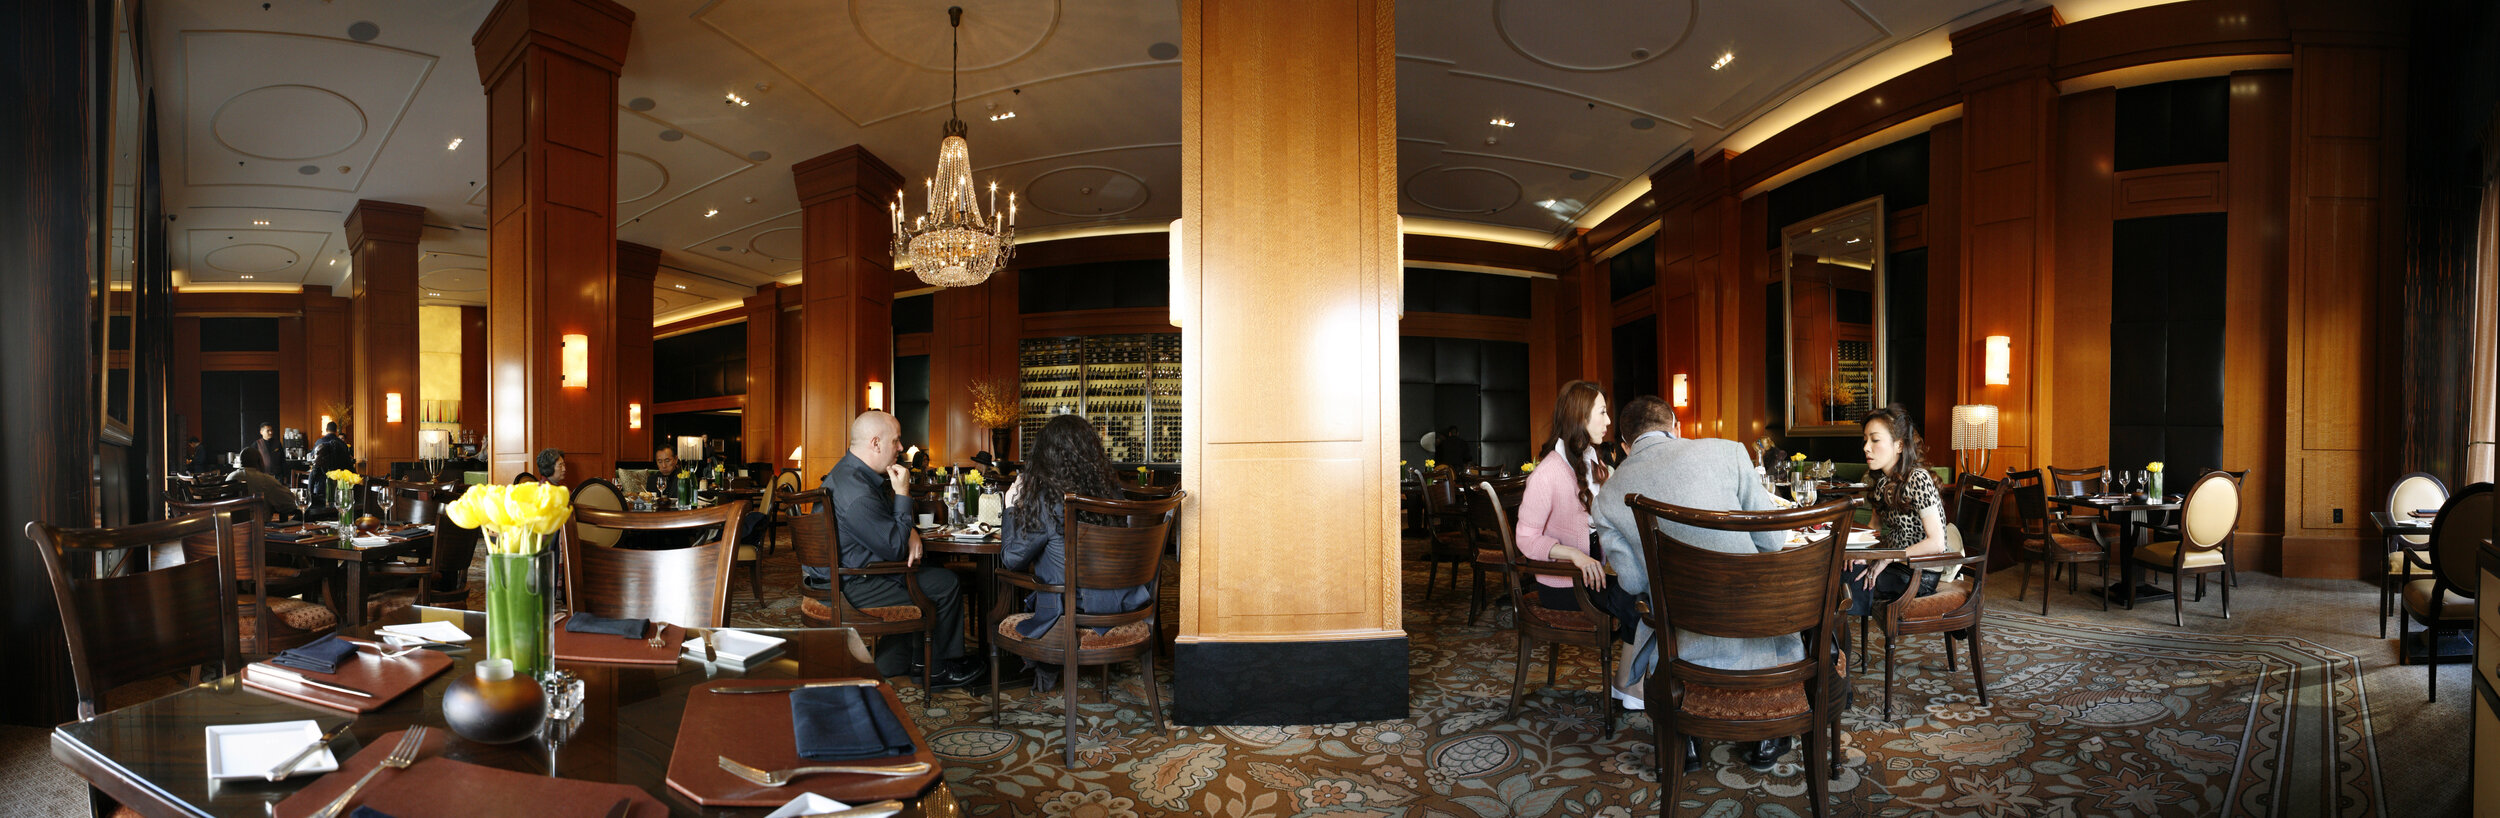  THE Blvd restaurant at the Beverly Wilshire Hotel in Beverly Hills 